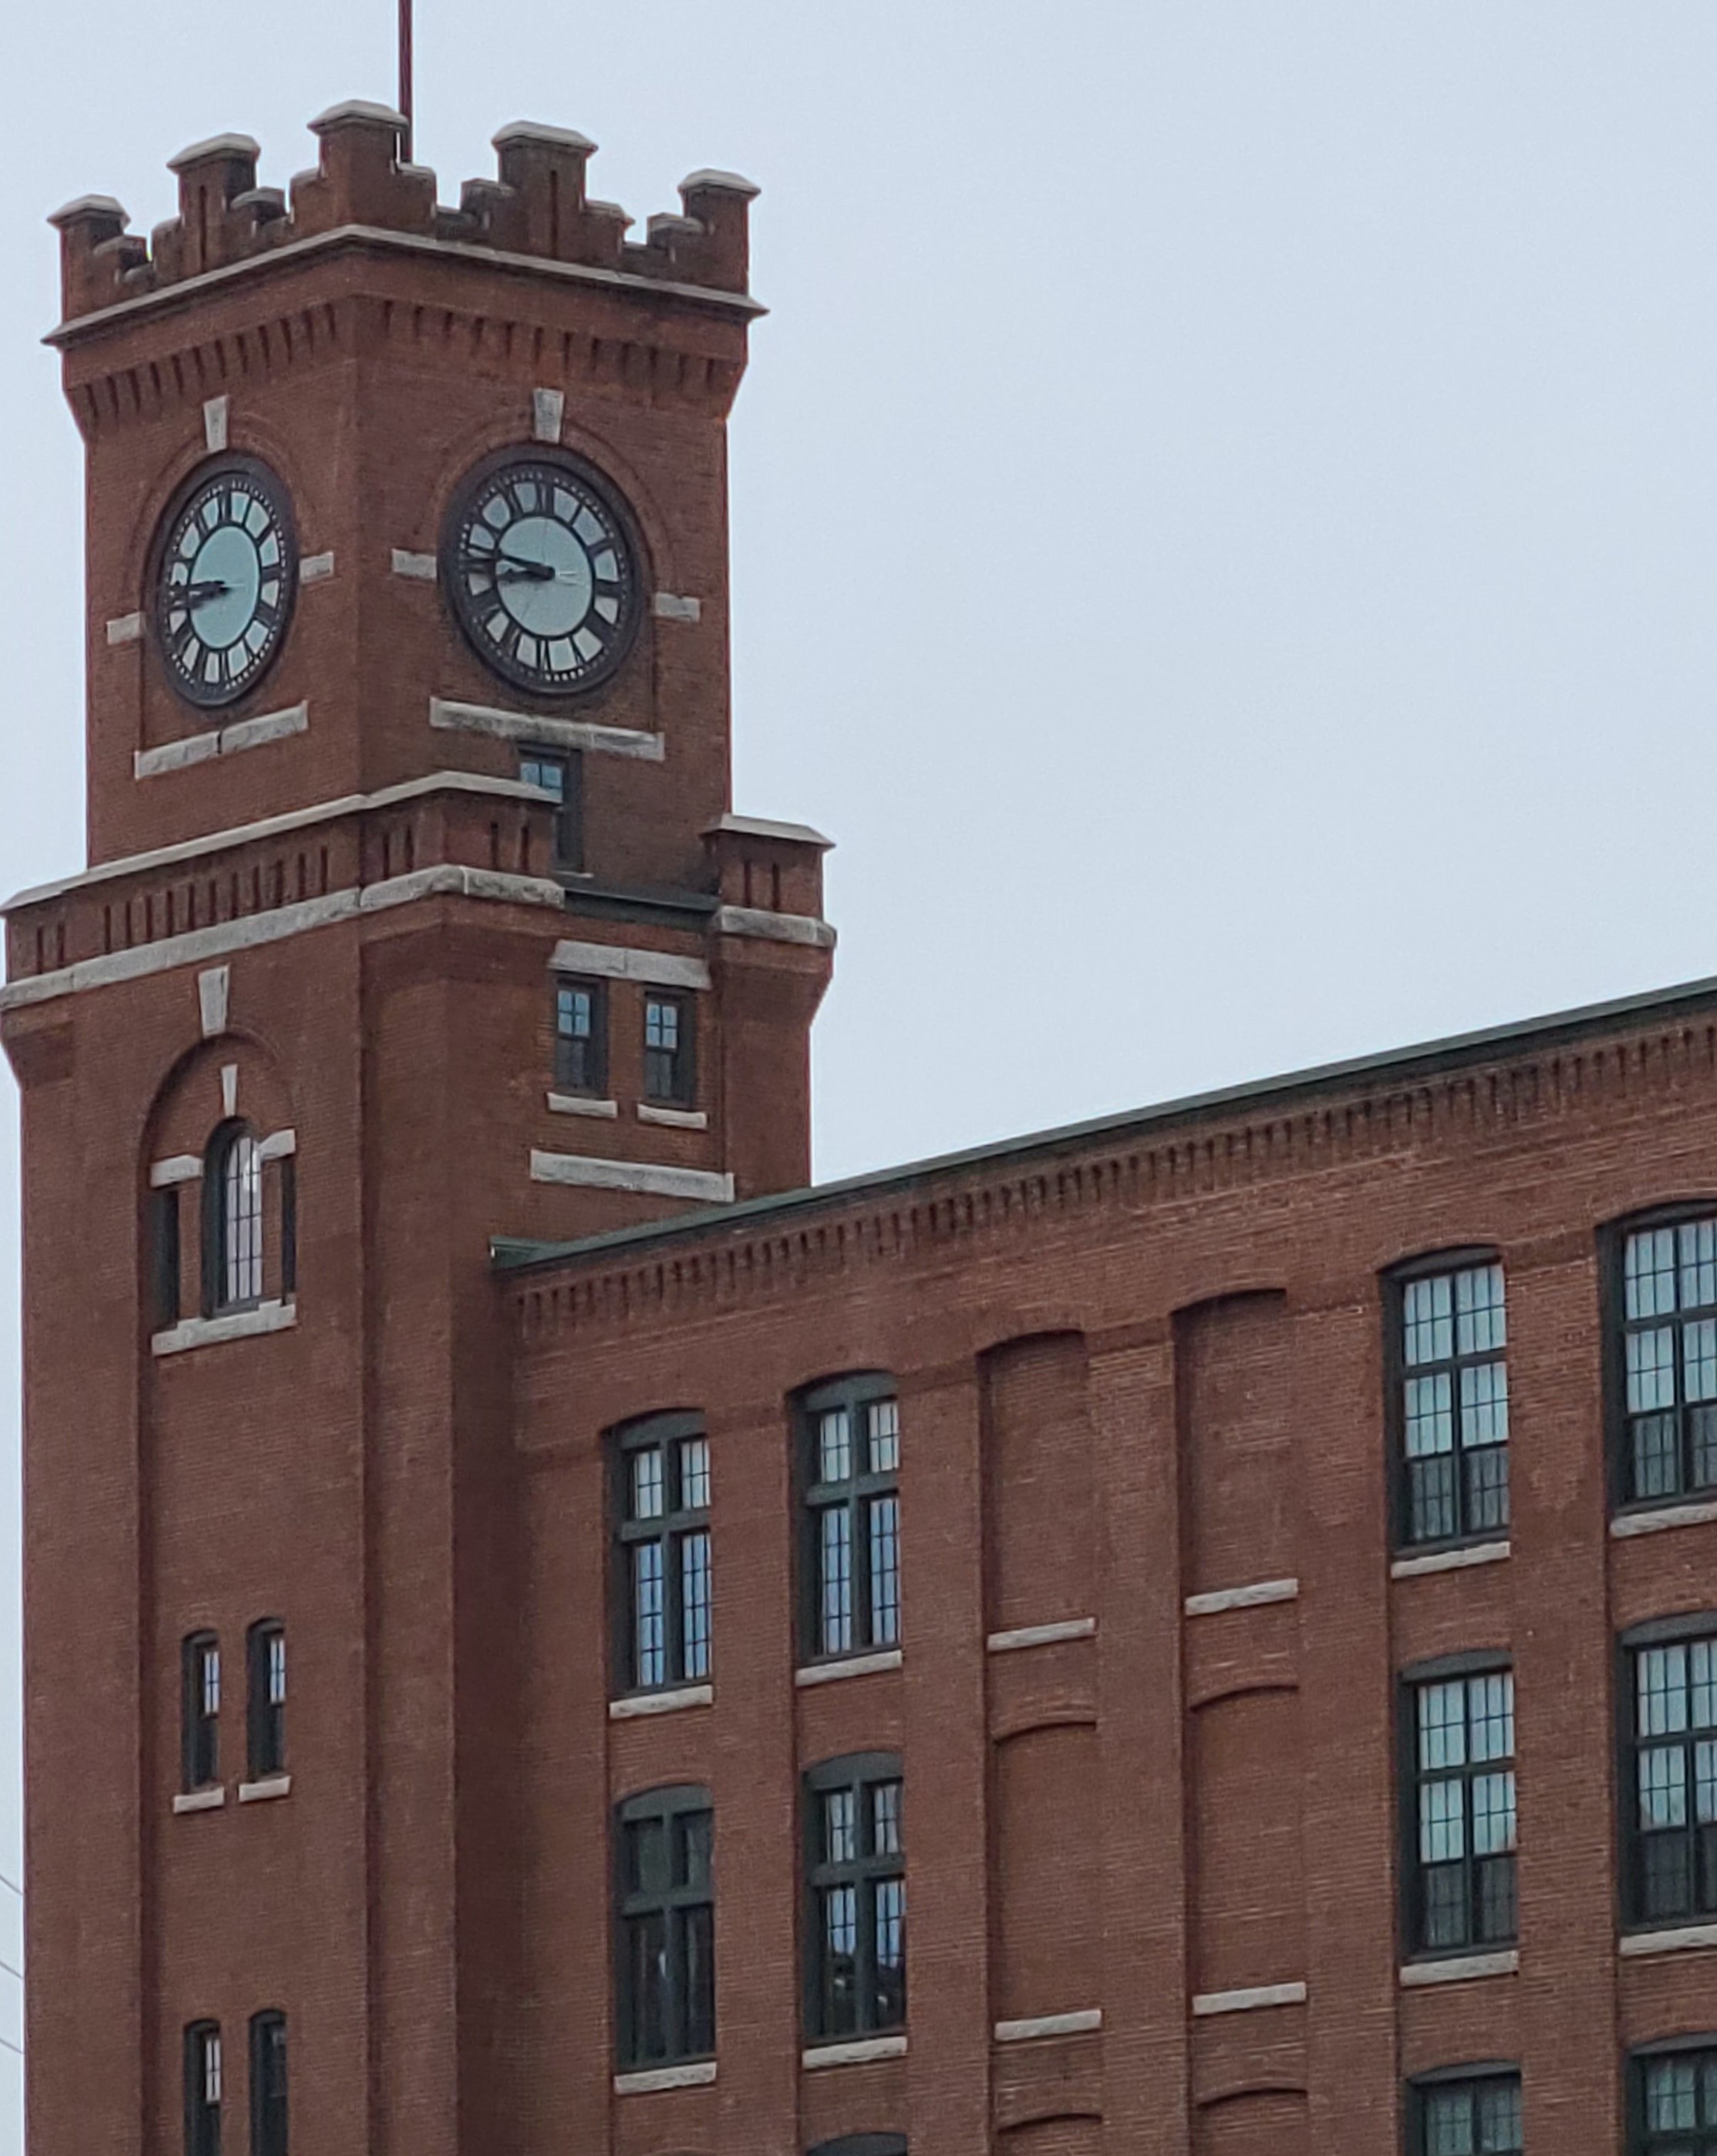 Photo of a brick clocktower taken from the ground looking up, with a cloudy sky in the background; the clock reads 9:45, and the top and bottom of the building are cut off by the edge of the photo, presented by New Hampshire personal injury lawyer Attorney Buckley